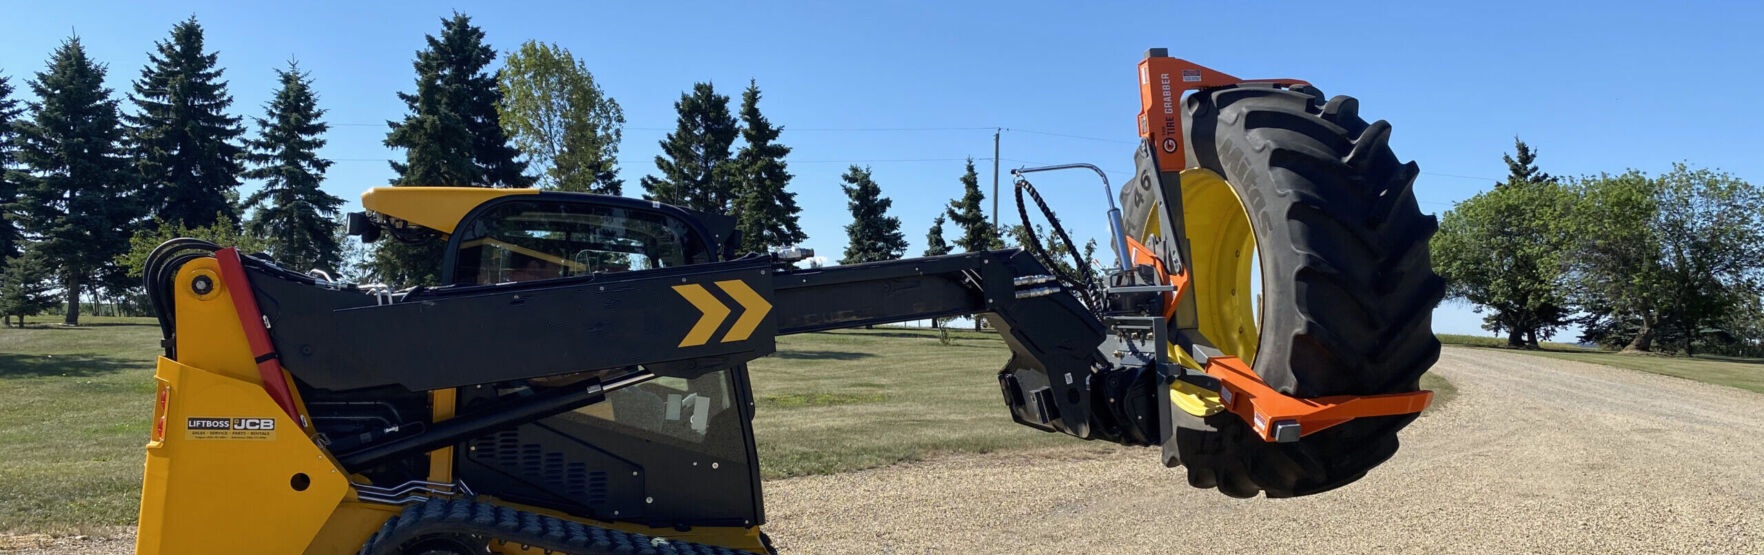 Skid Steer with TireGrabber attachment lifting a tractor tire